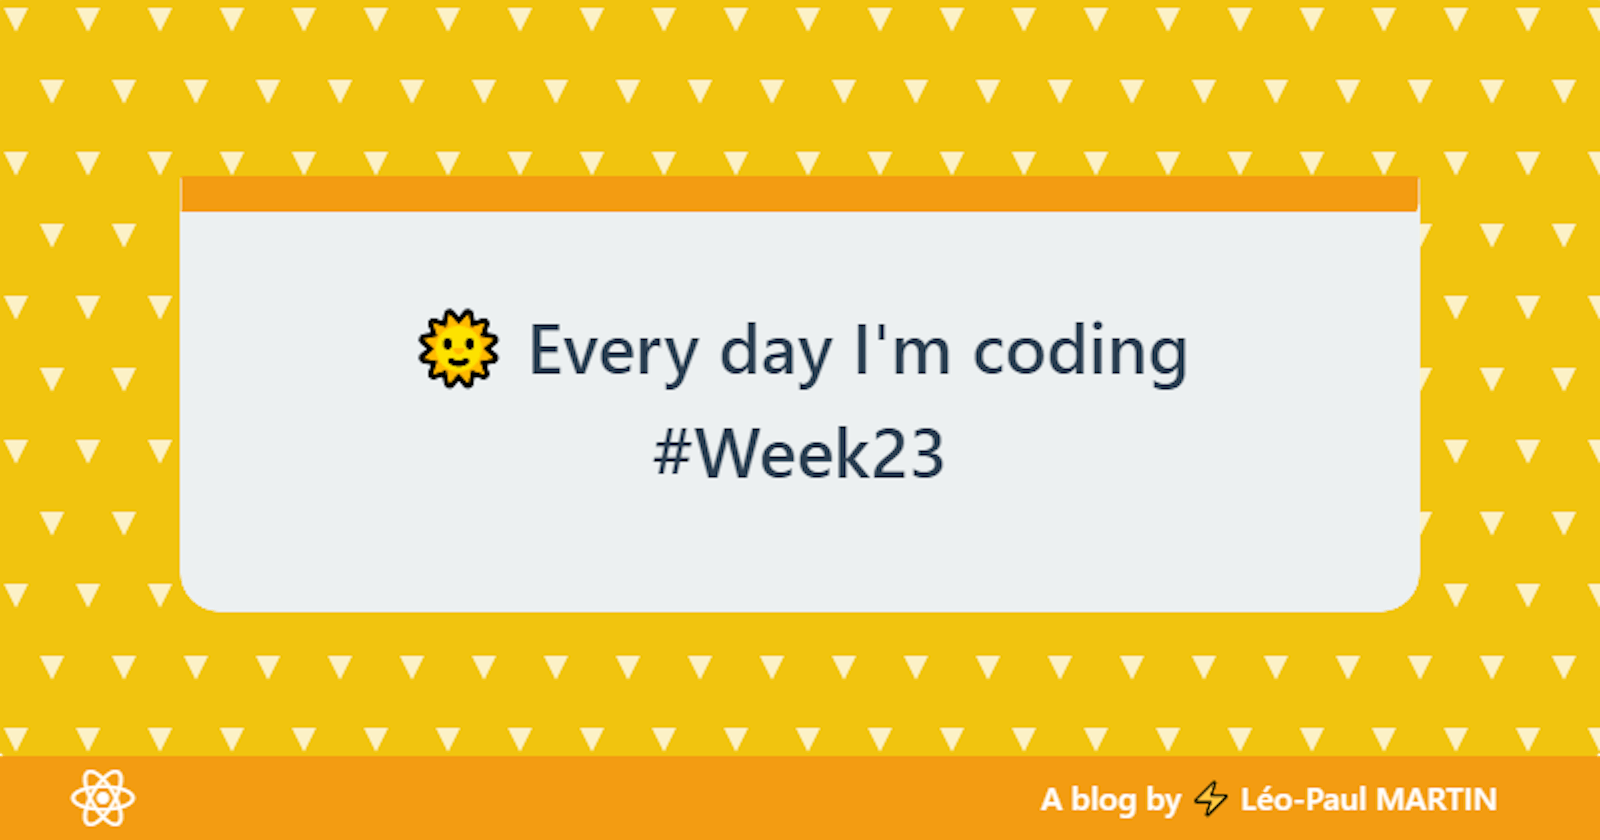 🌞 Every day I'm coding #Week23